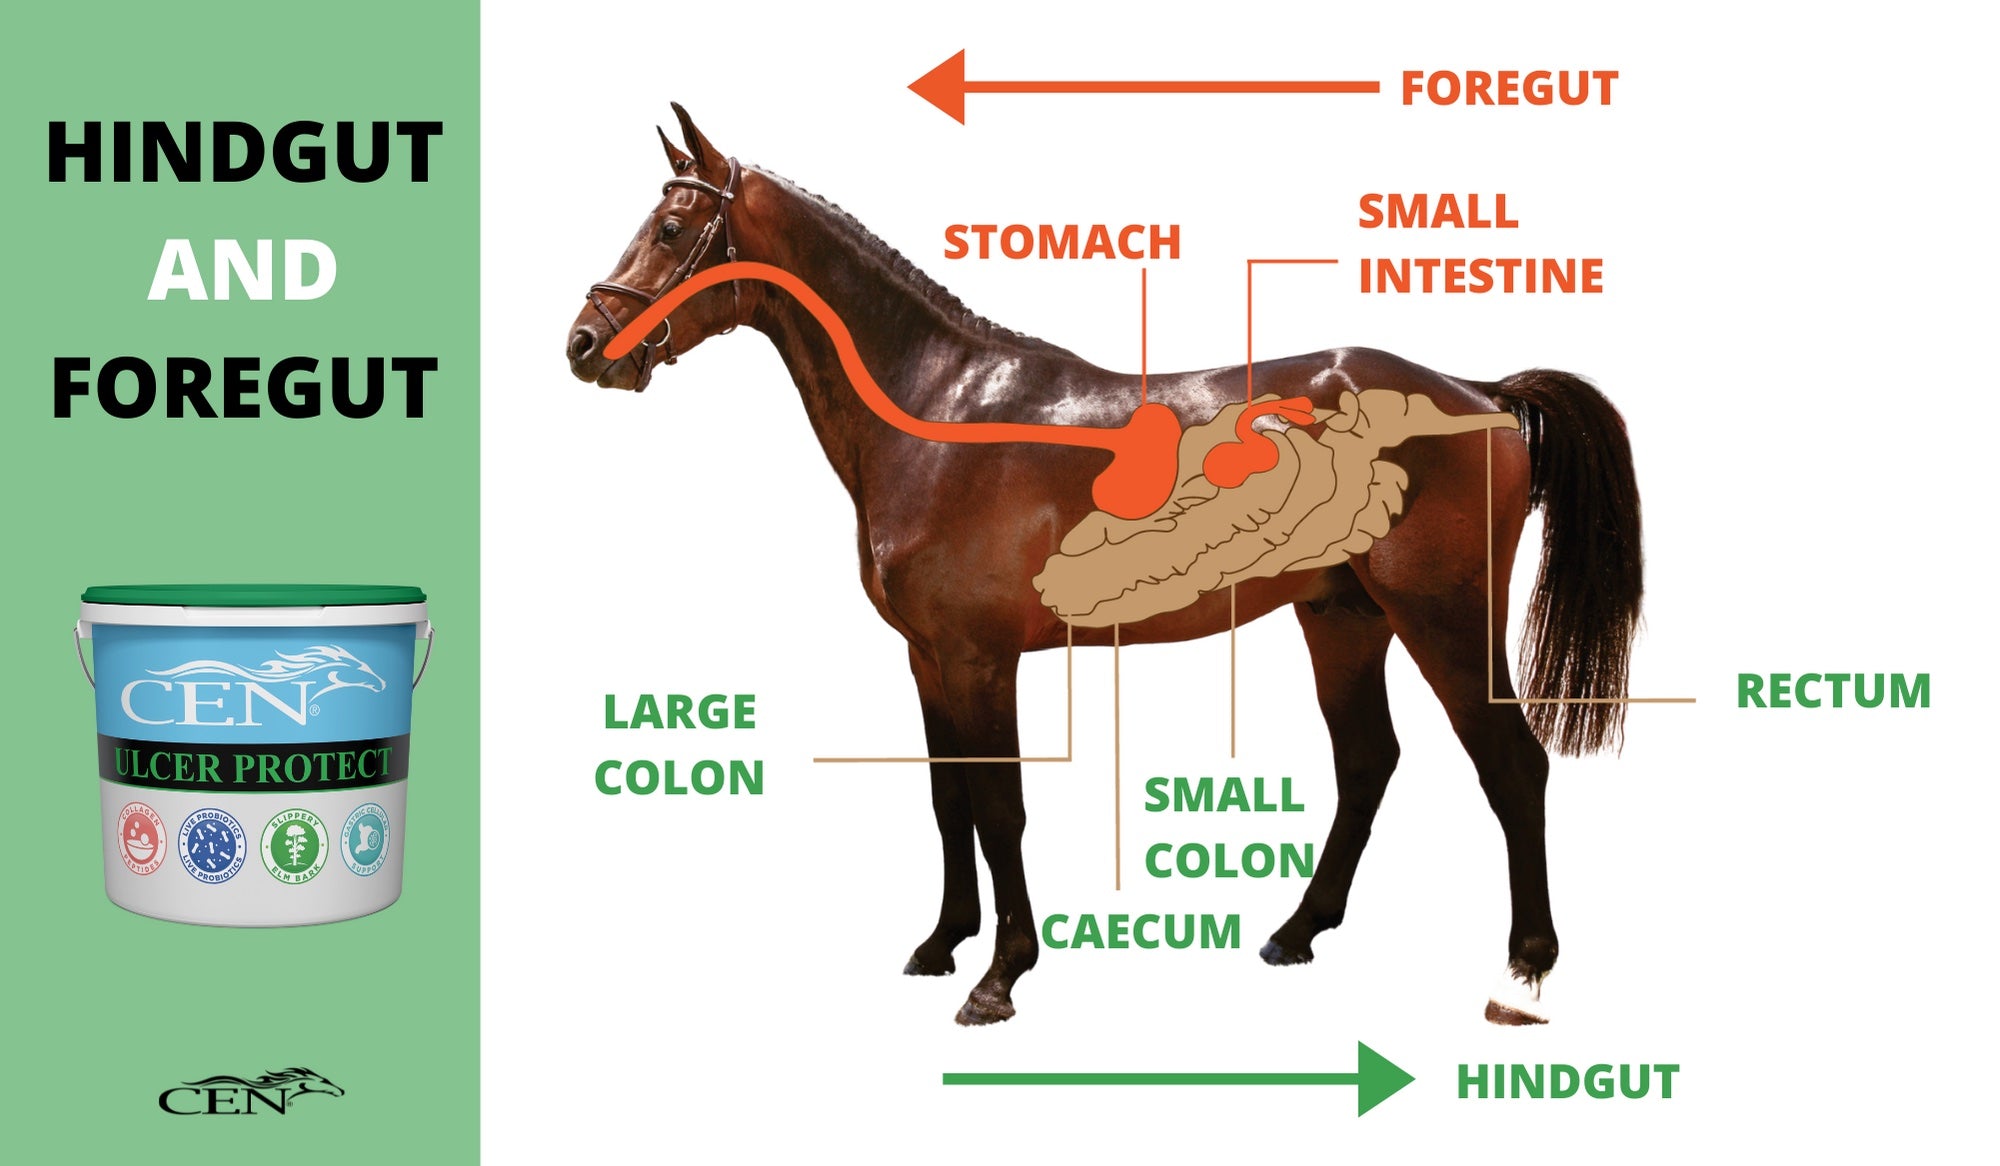 CEN Ulcer Protect Equine